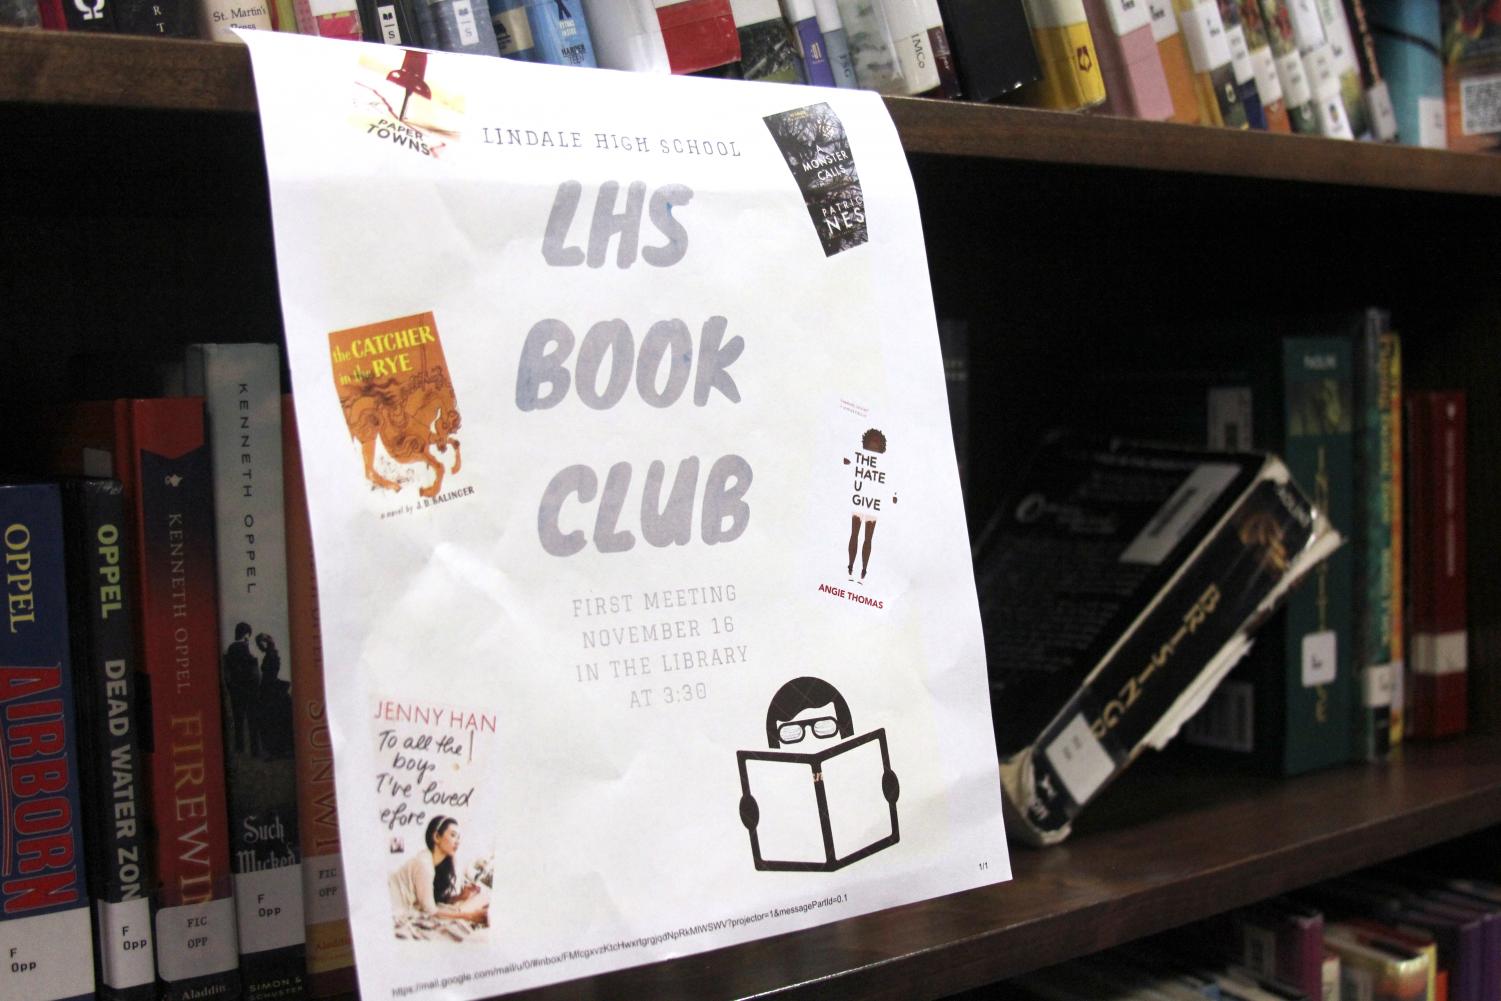 The first meeting of the book club will be November 16 in the library after school. Senior Kamryn Horton organized it along with library teacher Allison Morrow. 